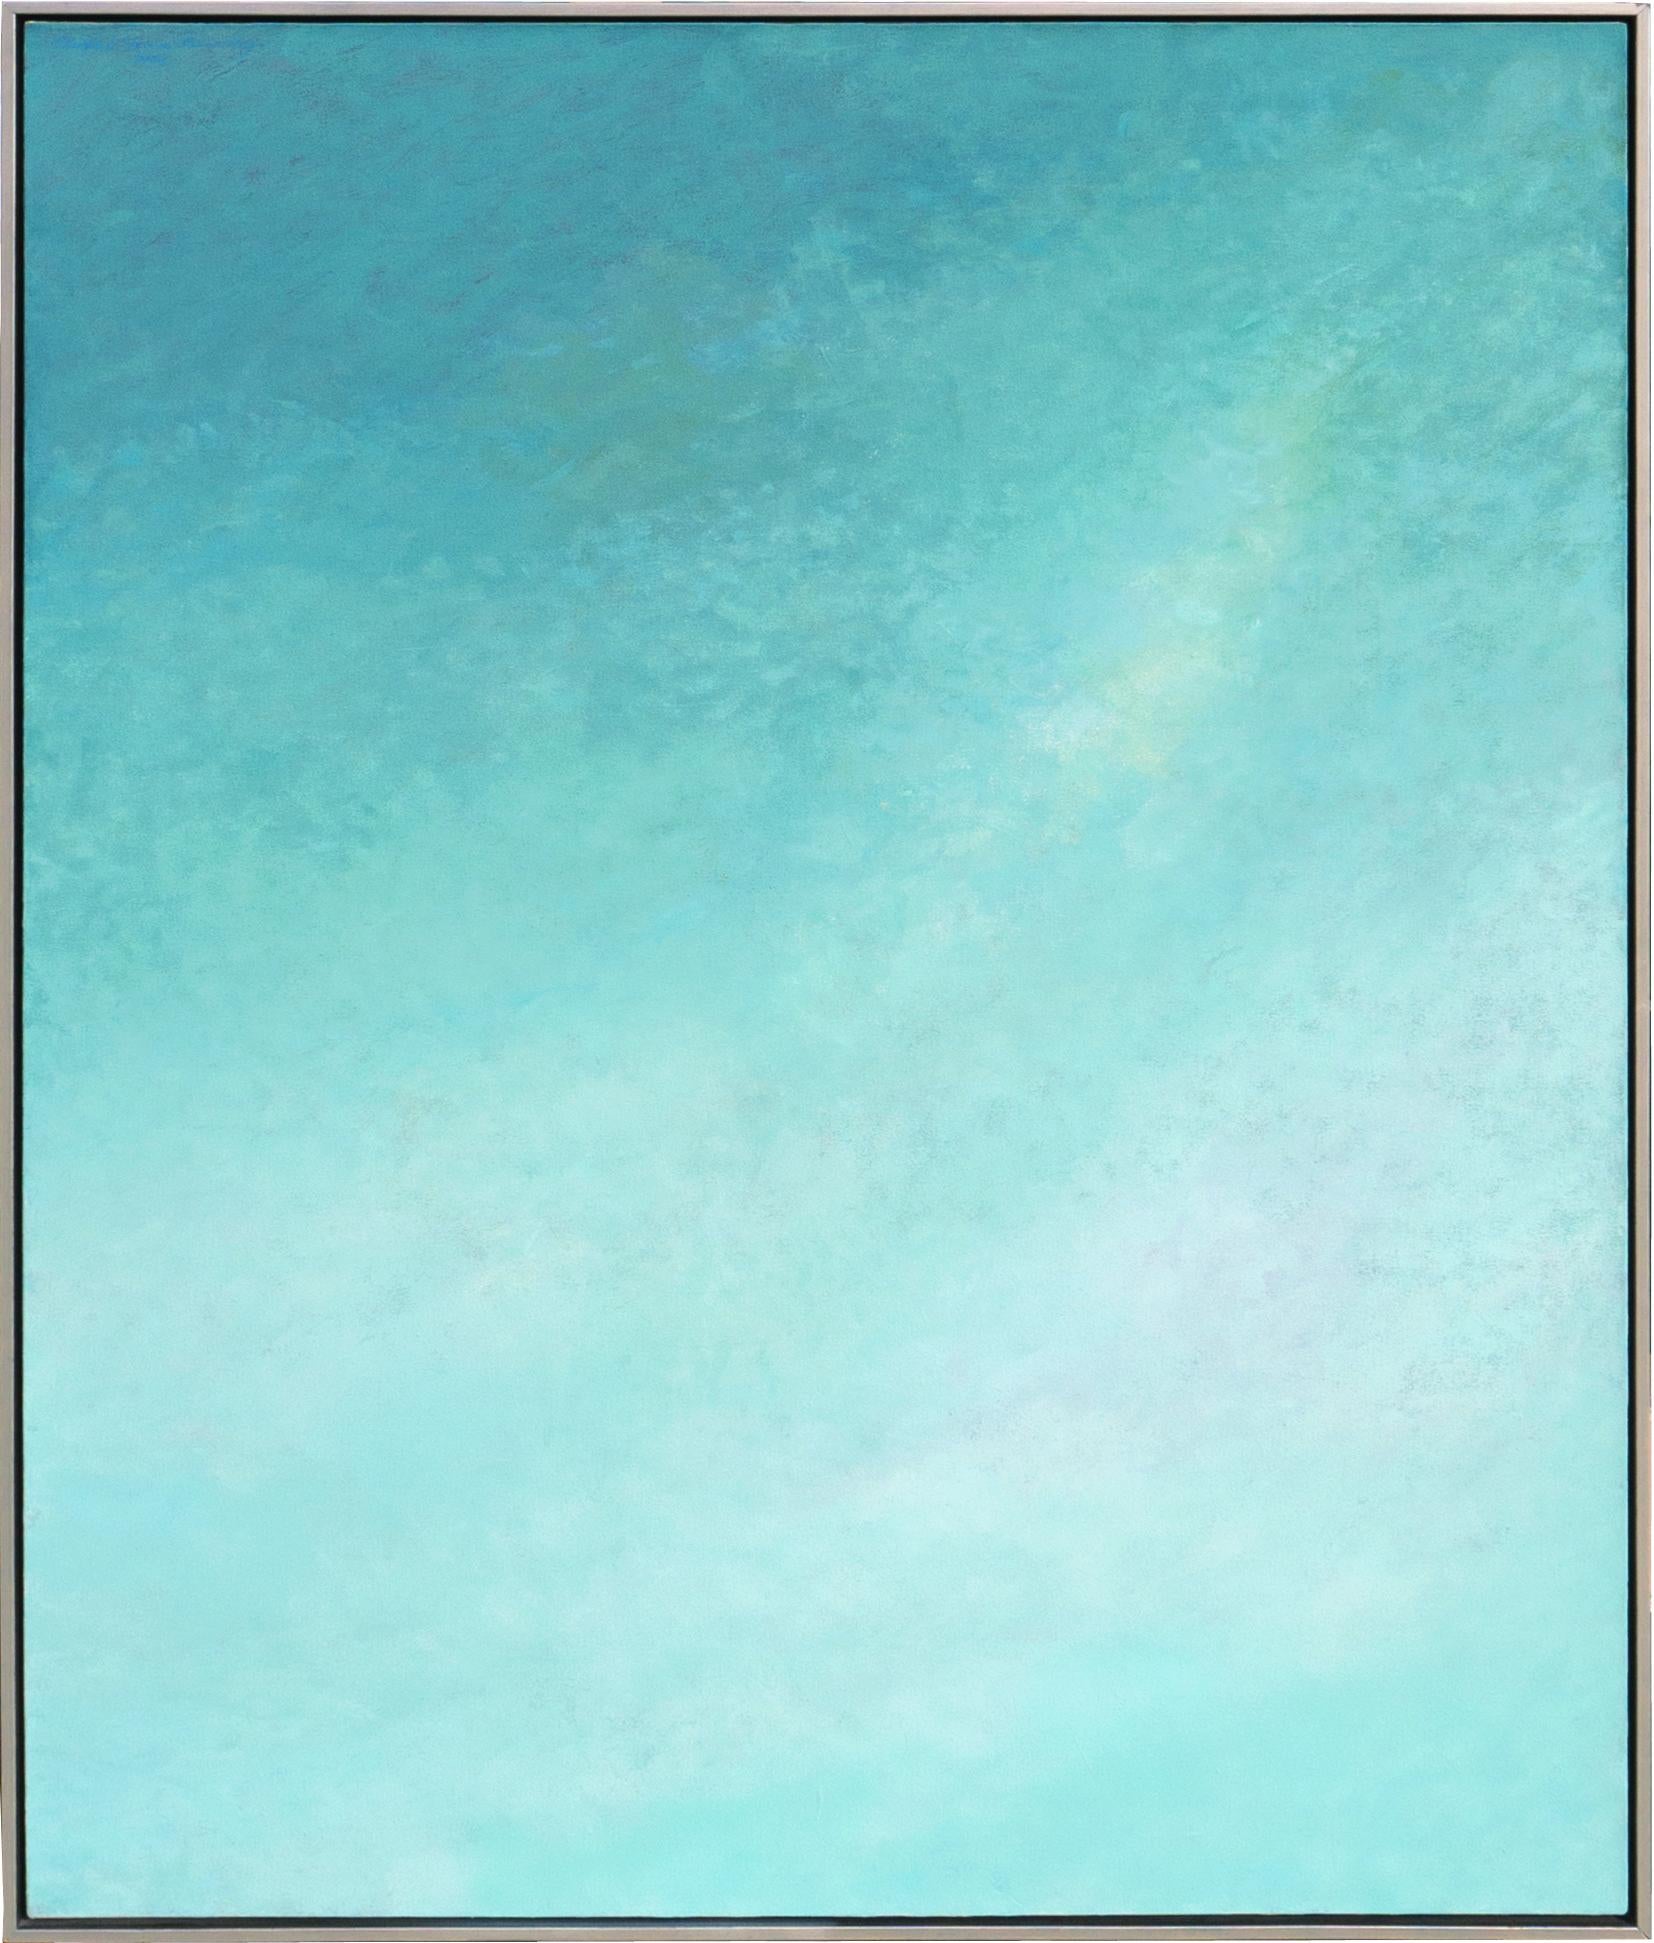 'Celestial Abstract', Gump's, San Francisco Bay Area Abstraction, Sky, Clouds - Painting by Michael Bradley